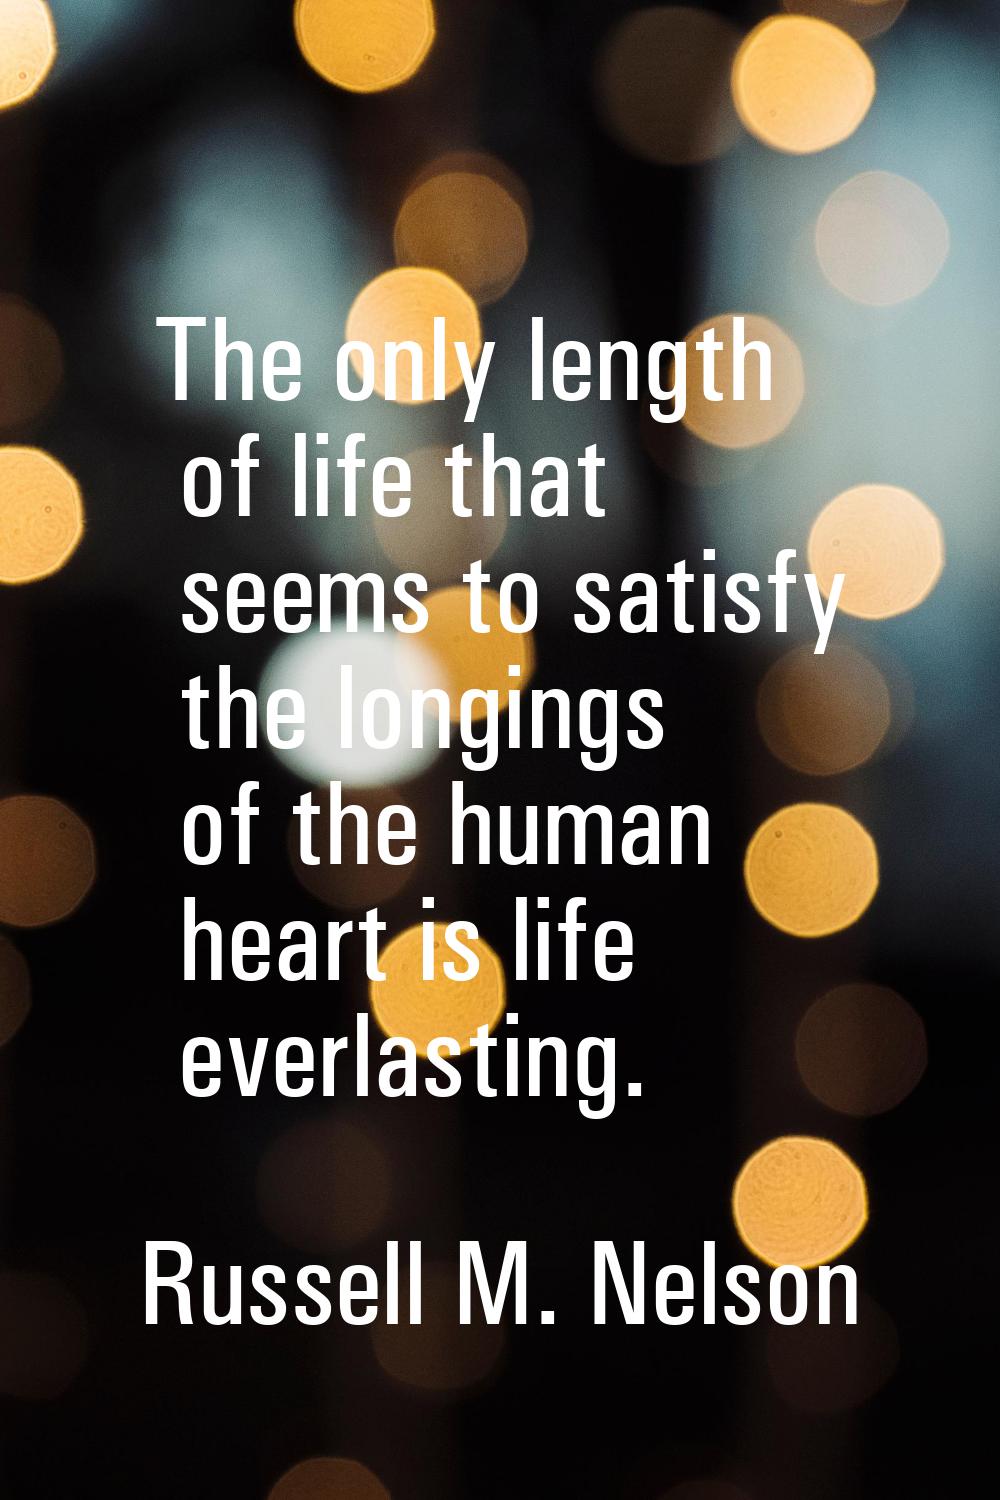 The only length of life that seems to satisfy the longings of the human heart is life everlasting.